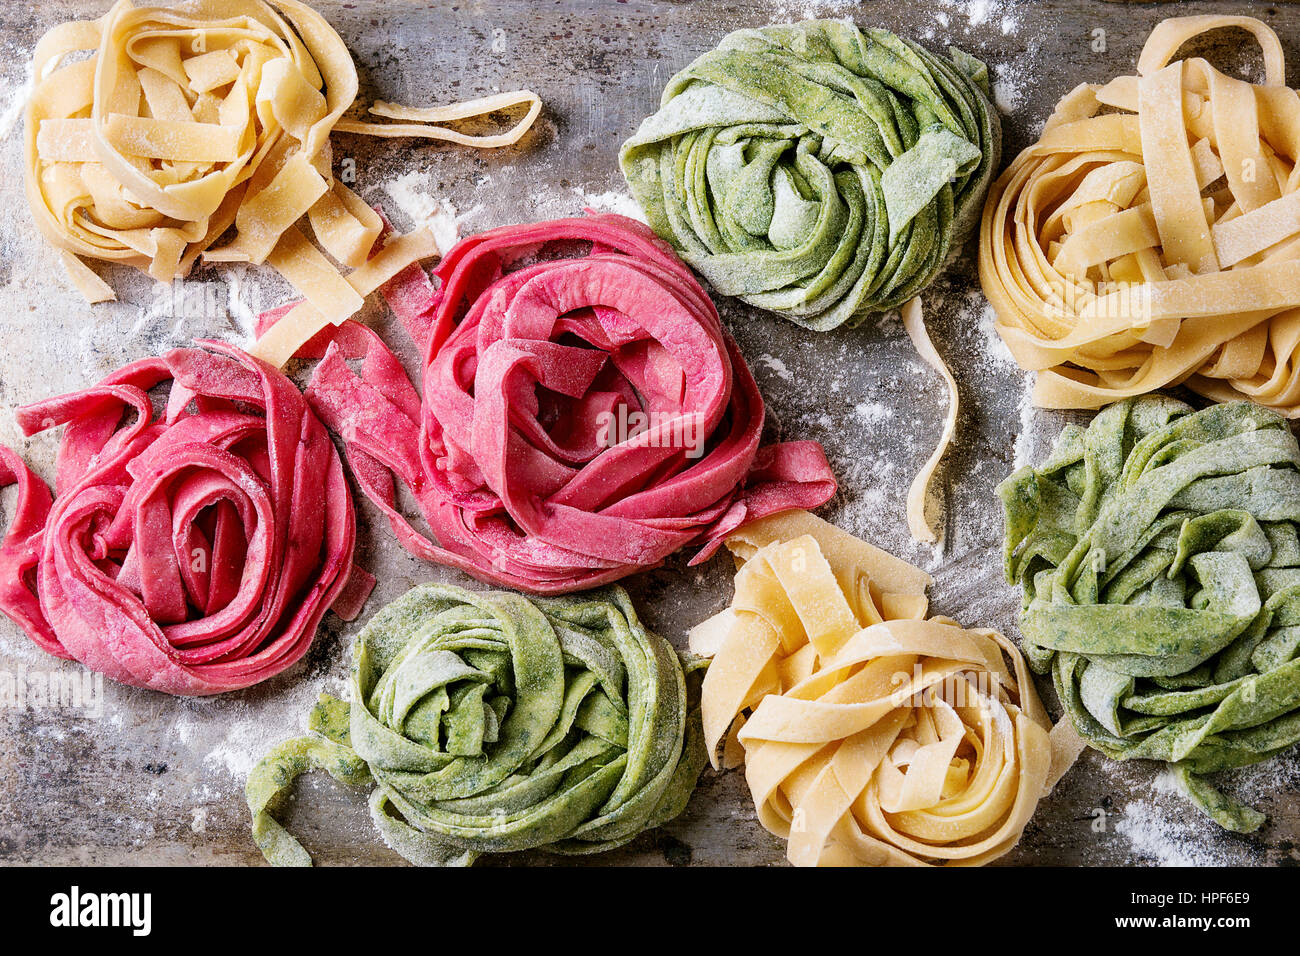 Variety of colored fresh raw uncooked homemade pasta tagliatelle green spinach, pink beetroot and yellow with flour over old metal texture background. Stock Photo